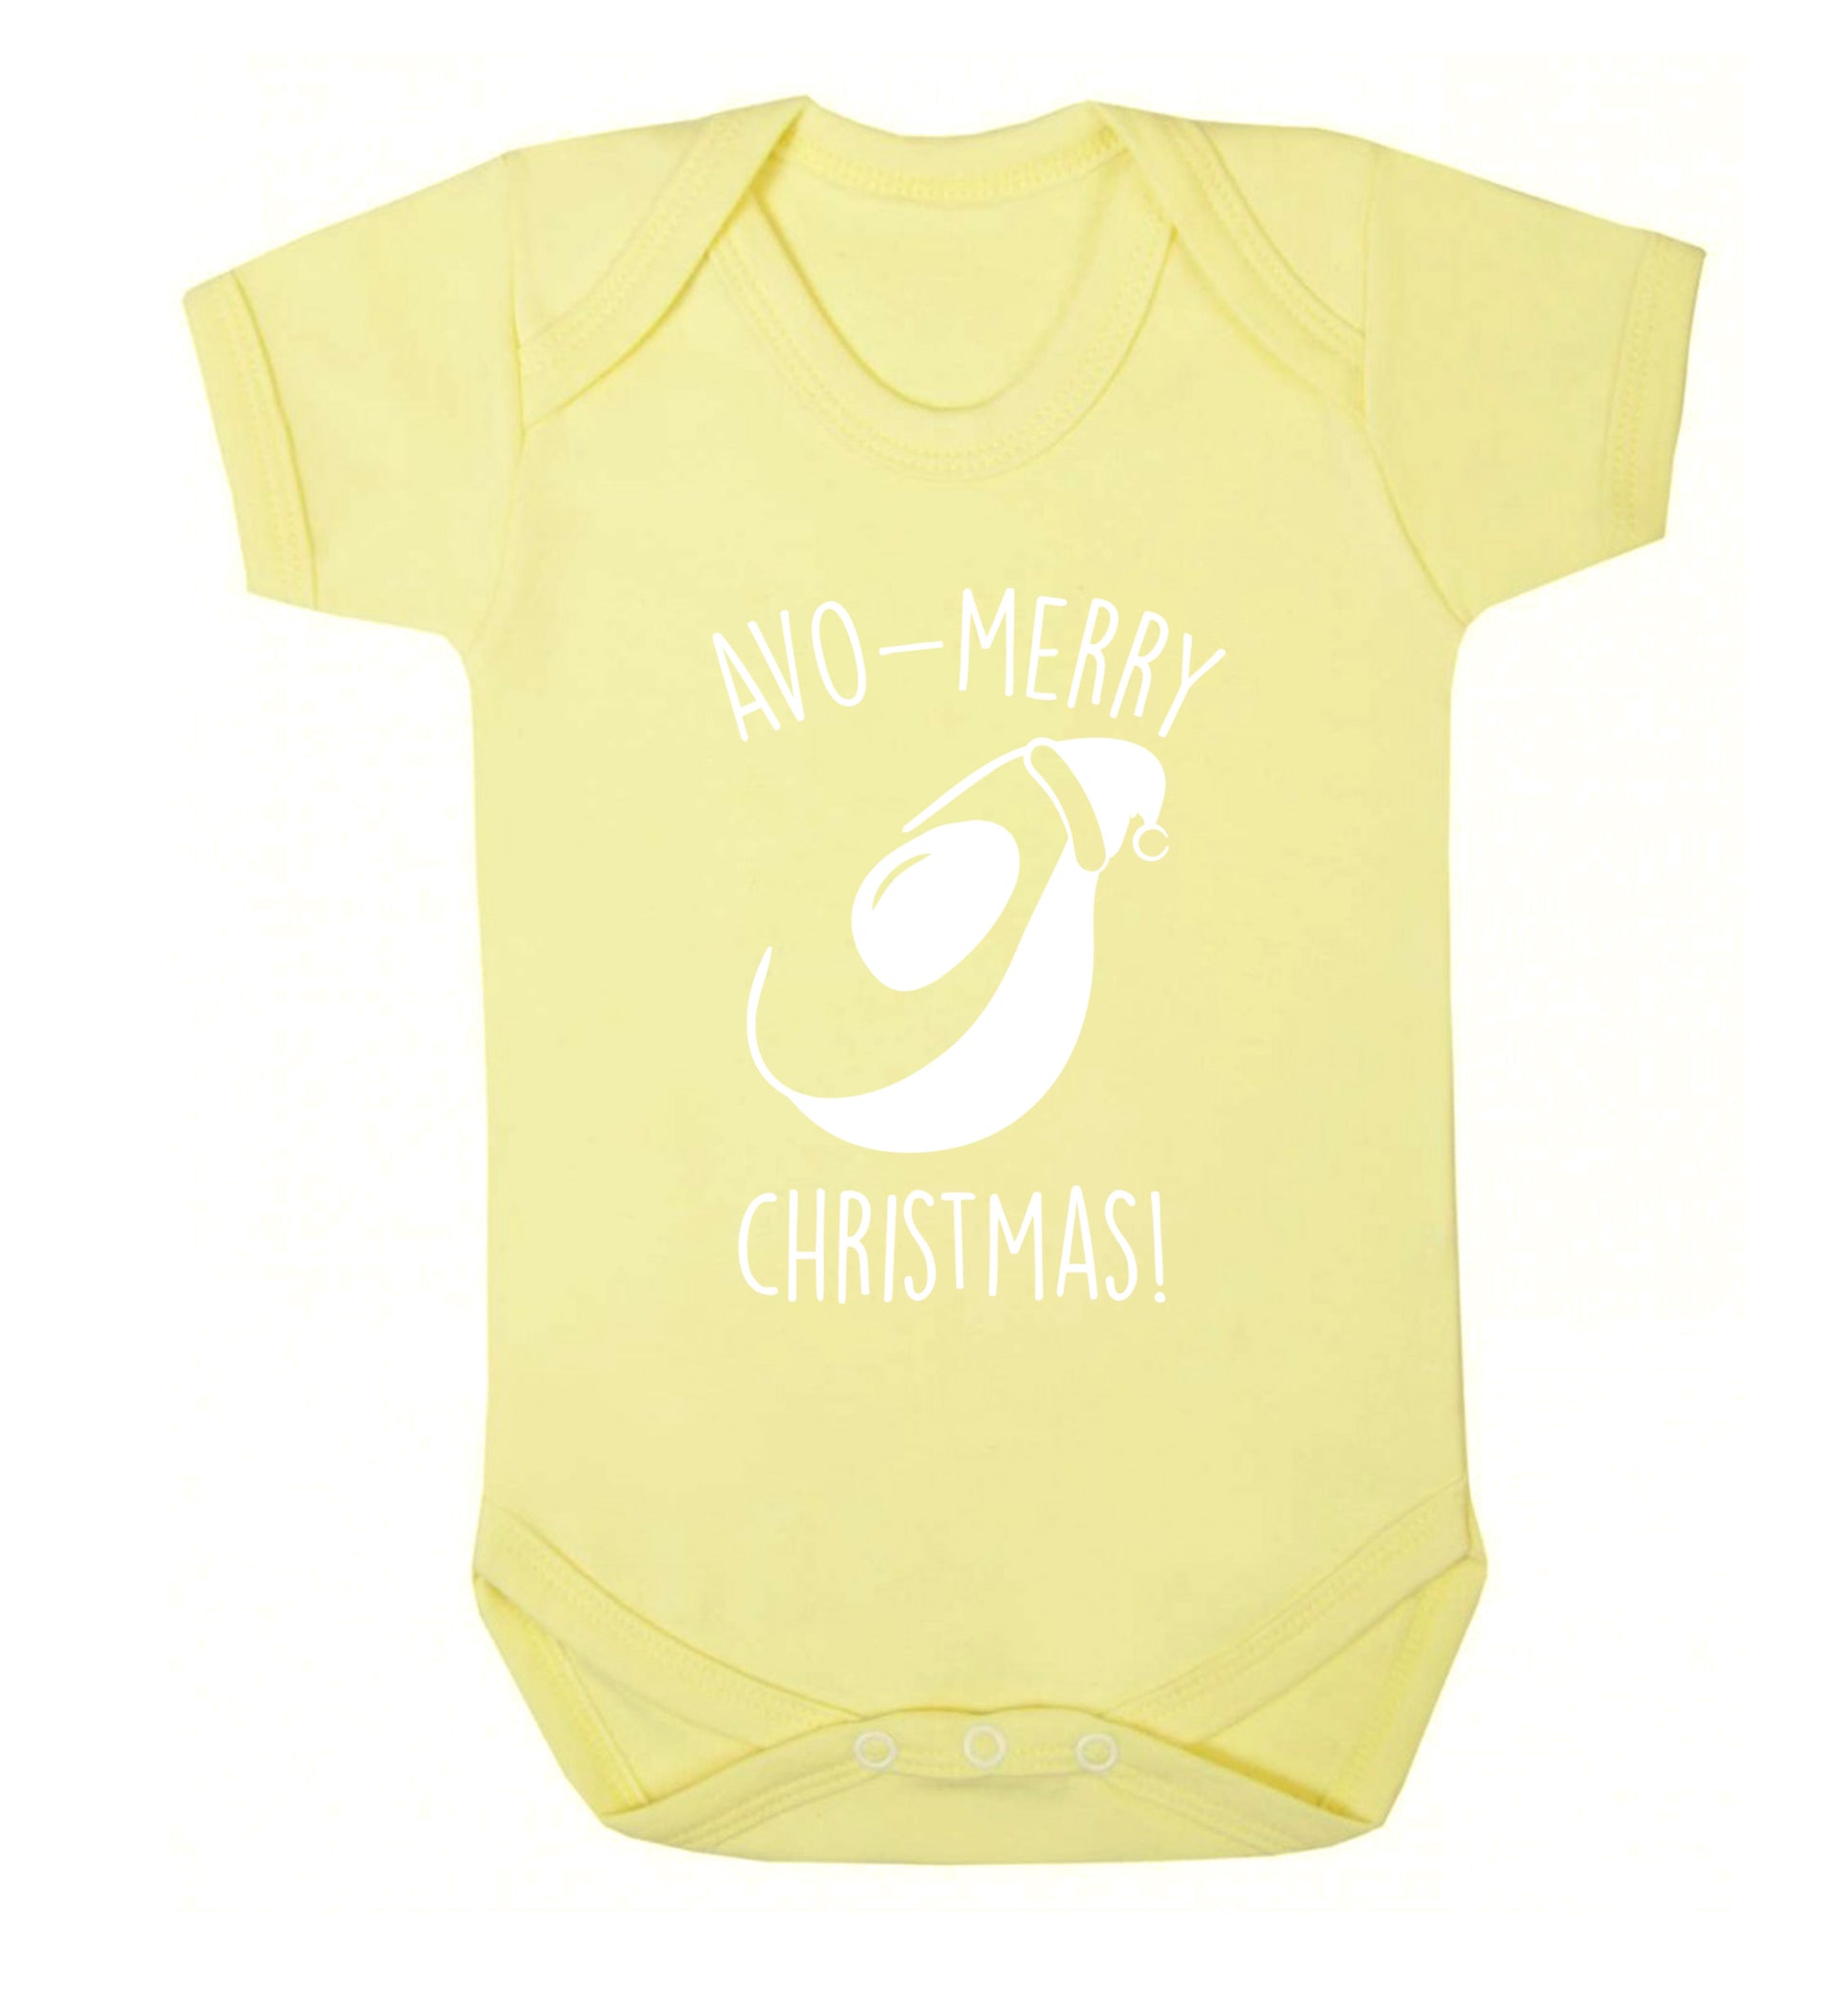 Avo-Merry Christmas Baby Vest pale yellow 18-24 months